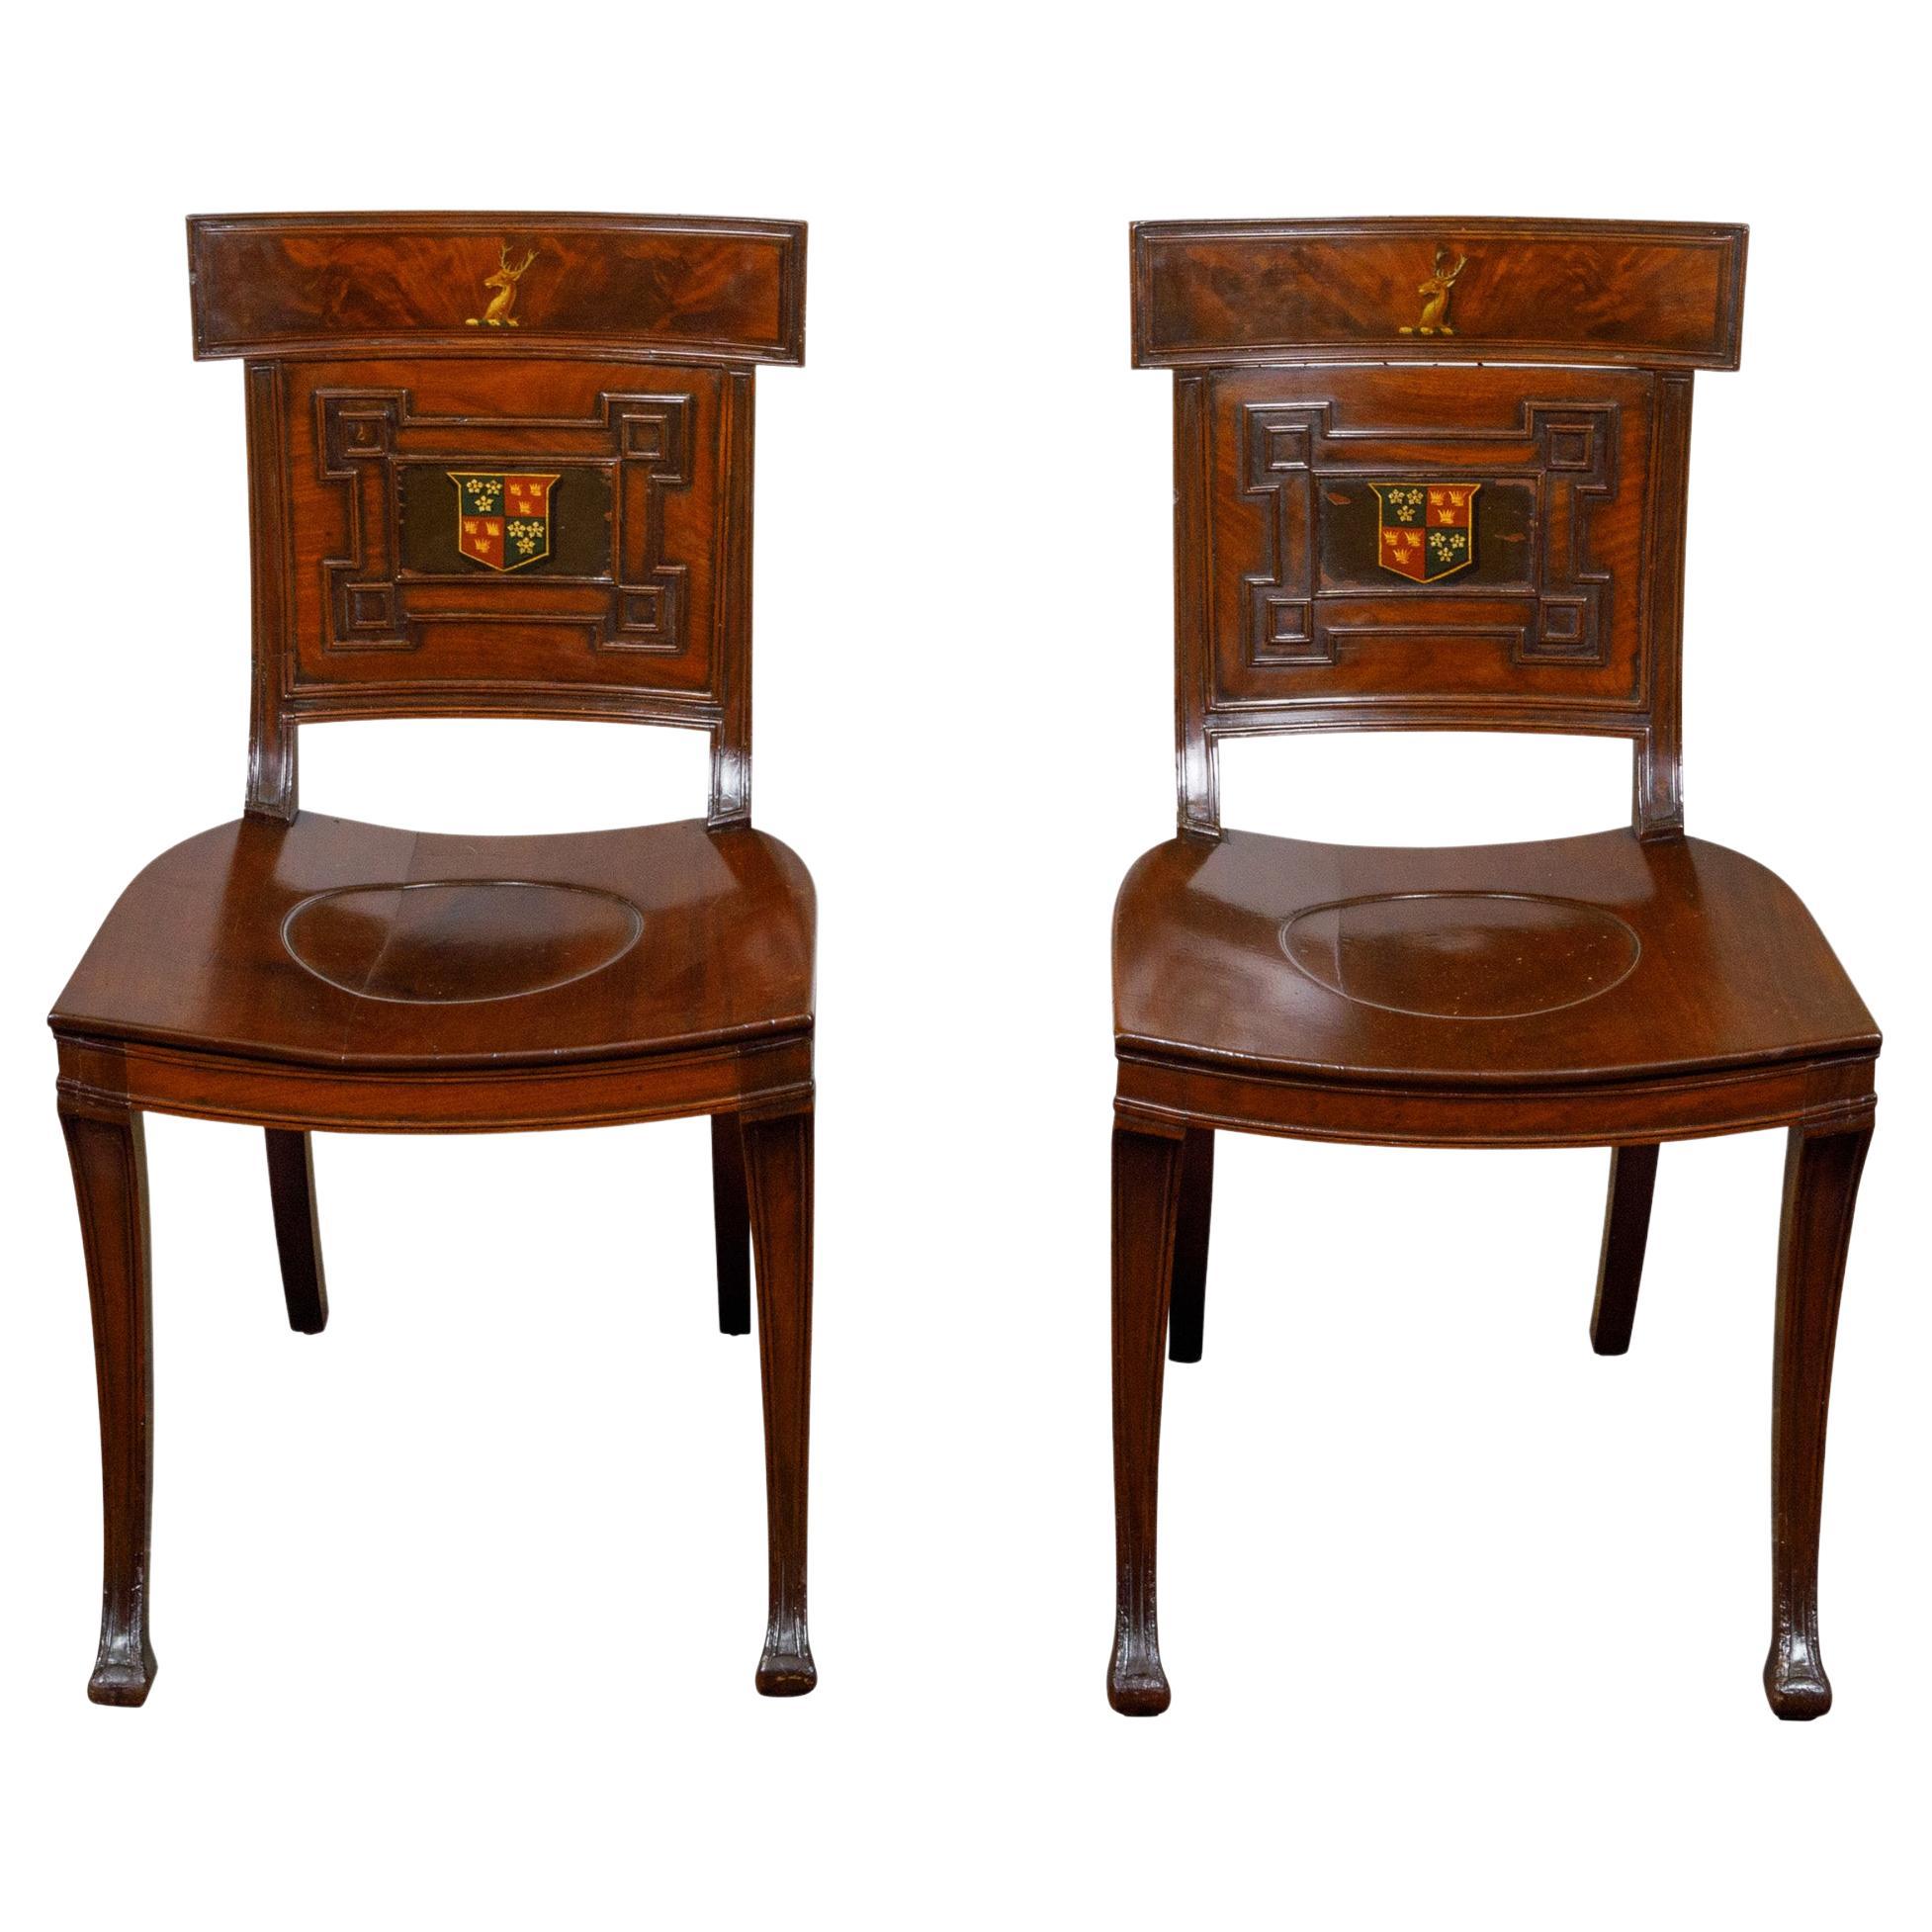 Pair of English Regency Mahogany Hall Chairs with Painted Coat of Arms For Sale